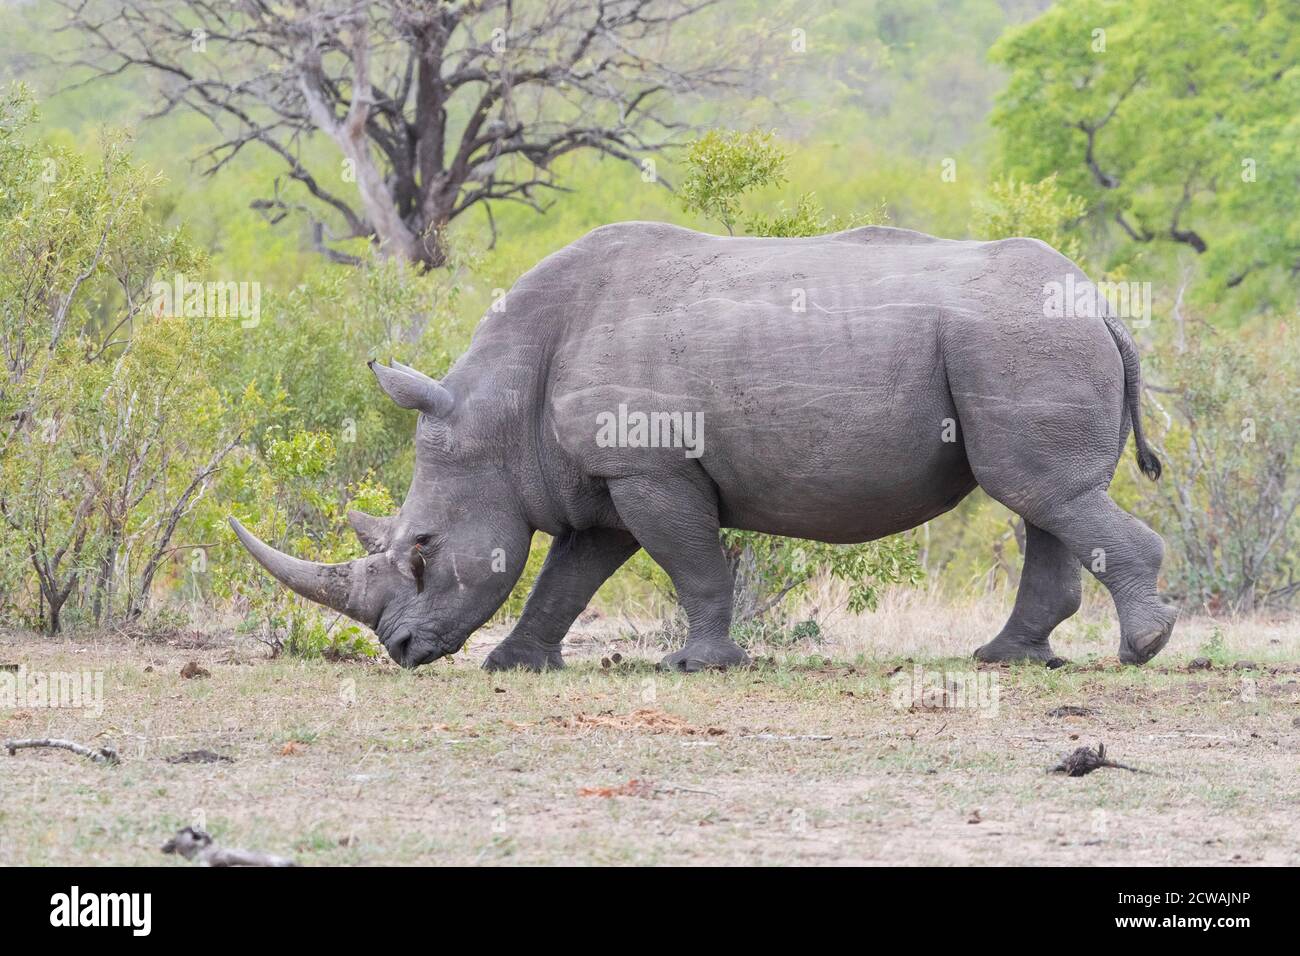 White Rhinoceros (Ceratotherium simum), side view of an adult male walking, Mpumalanga, South Africa Stock Photo